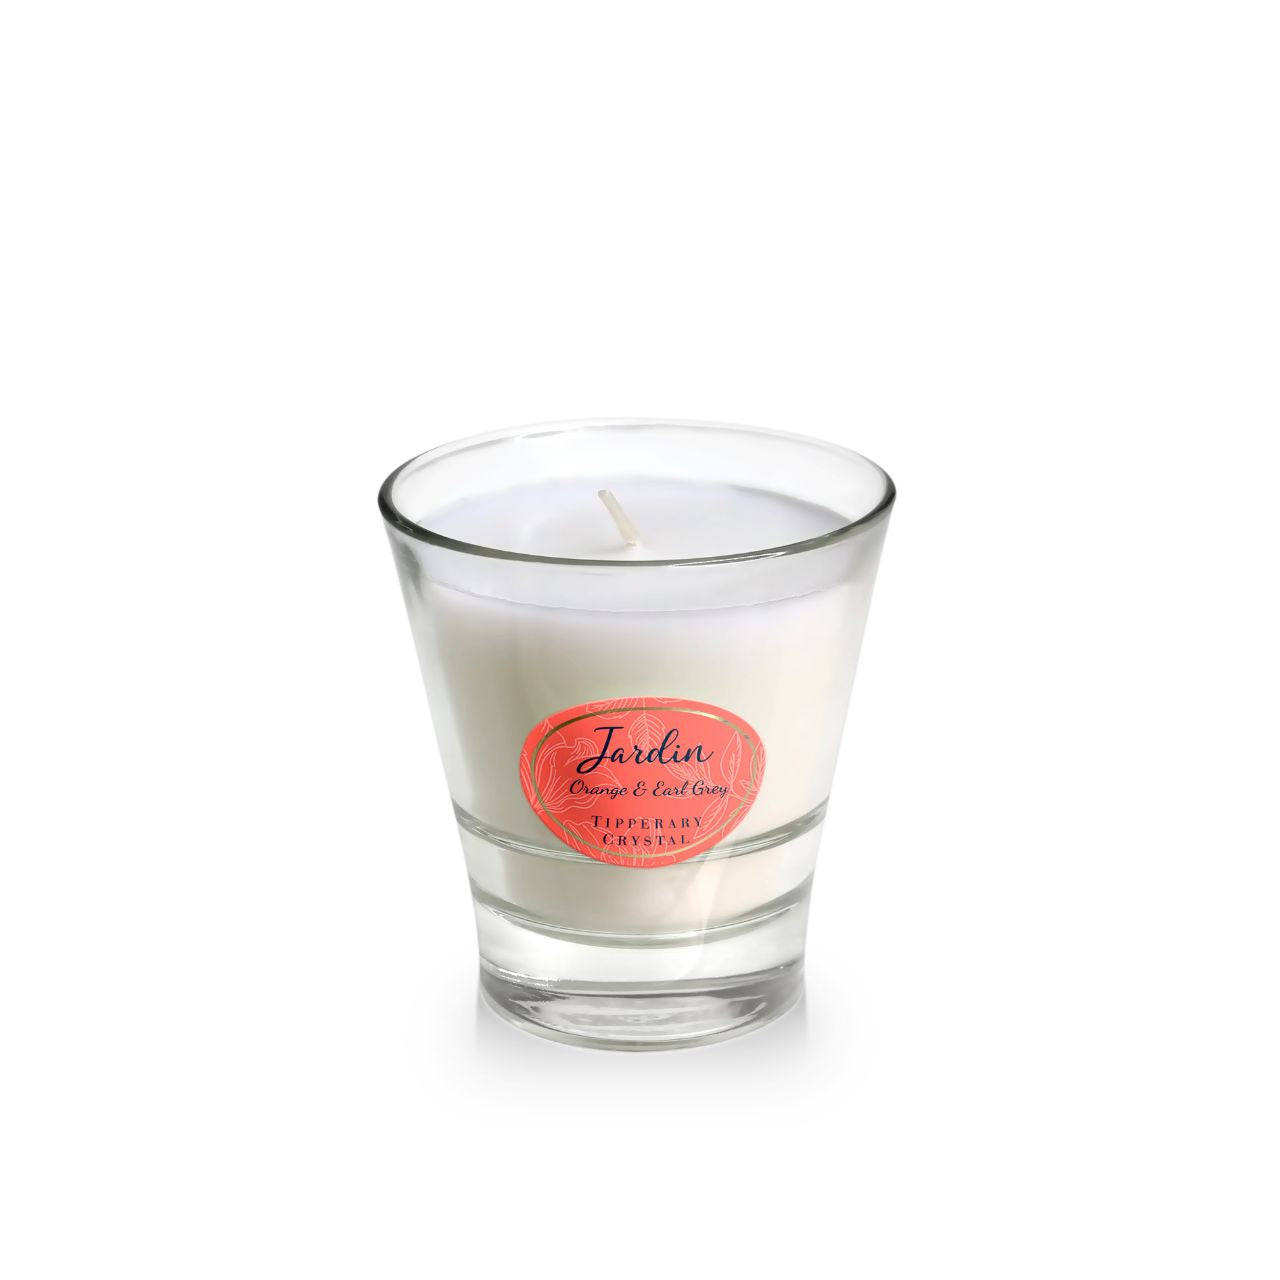 This slightly floral and tangy scent combines the fragrance of orange peel with the balancing base notes of musk. A hint of ginger beckons amidst this uplifting aroma that reminds one of an afternoon sipping tea.